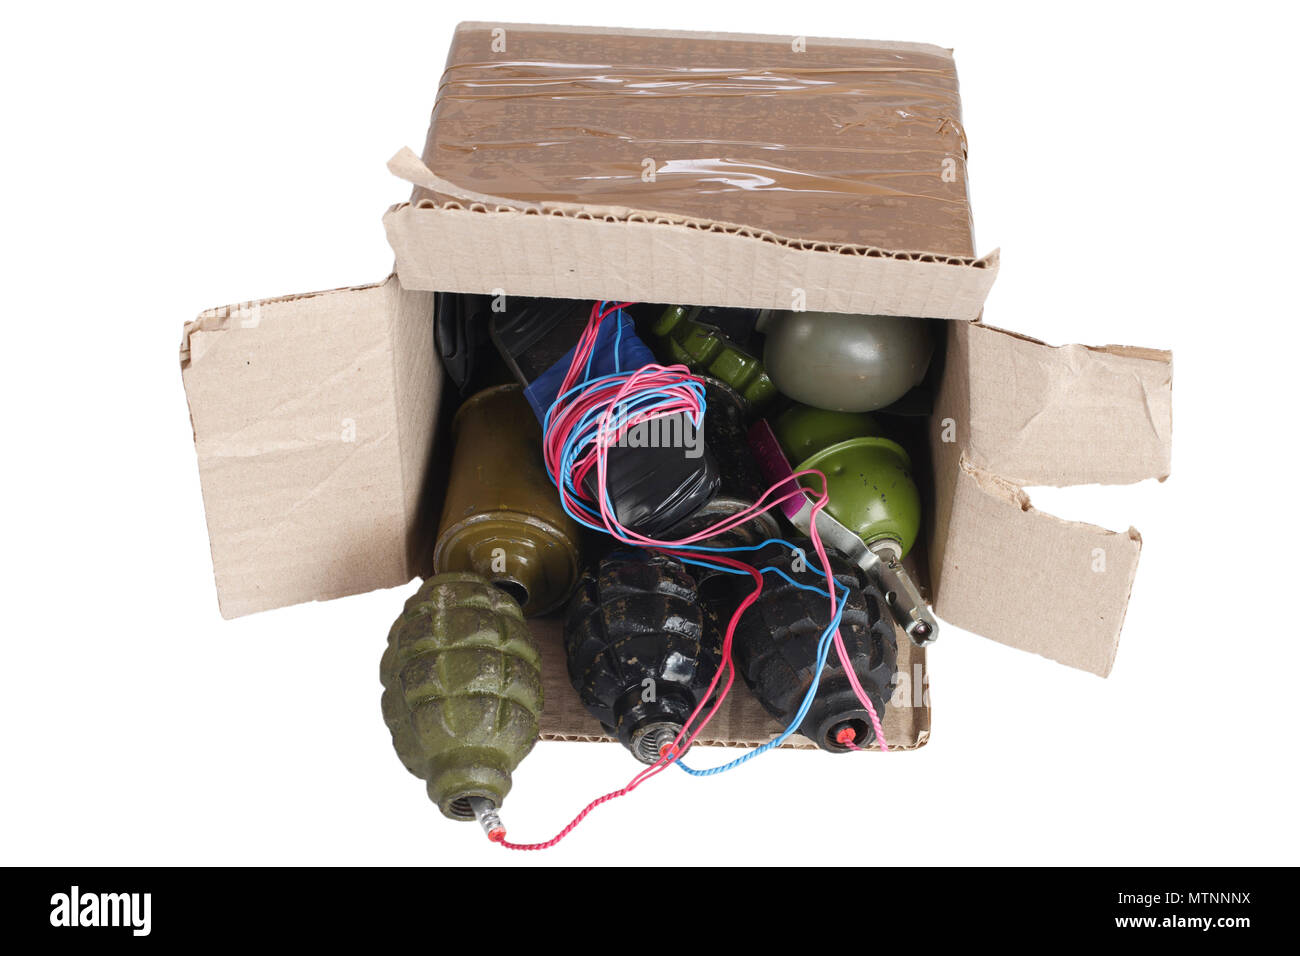 IED - Mailbomb (Improvised Explosive Device in mailbox) Stock Photo